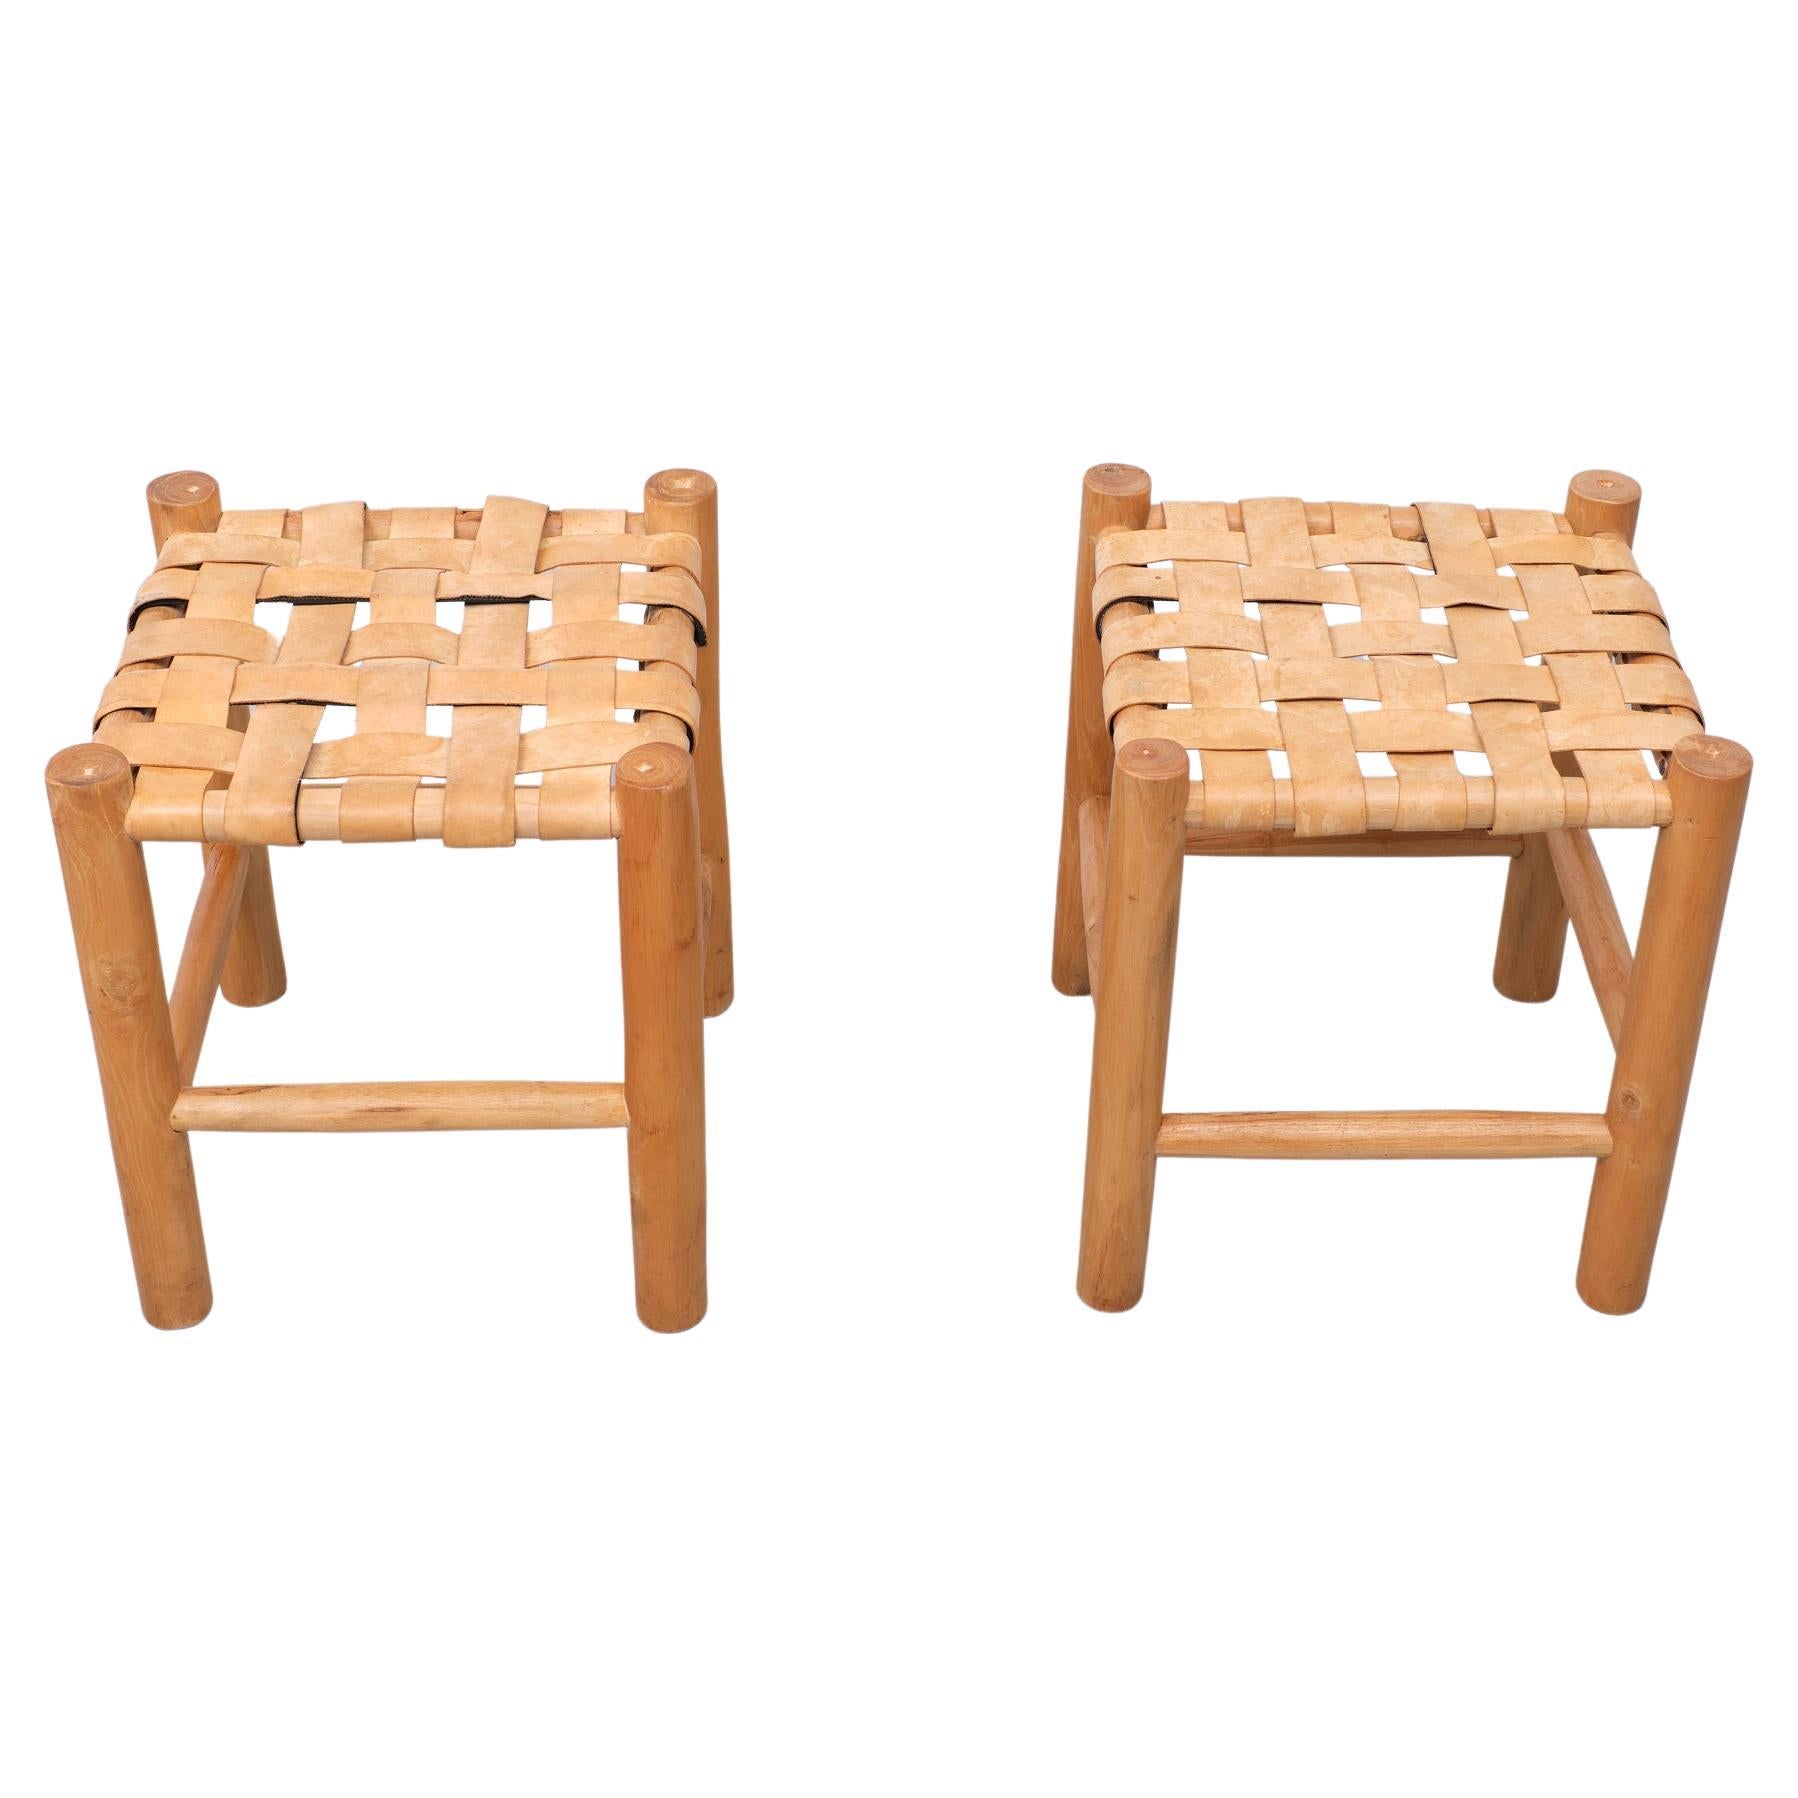 Two very nice strap Leather seating stools .Round Pine Wood legs ,comes with
Camel color Leather straps .Good condition . 

Please don't hesitate to reach out for alternative shipping quote